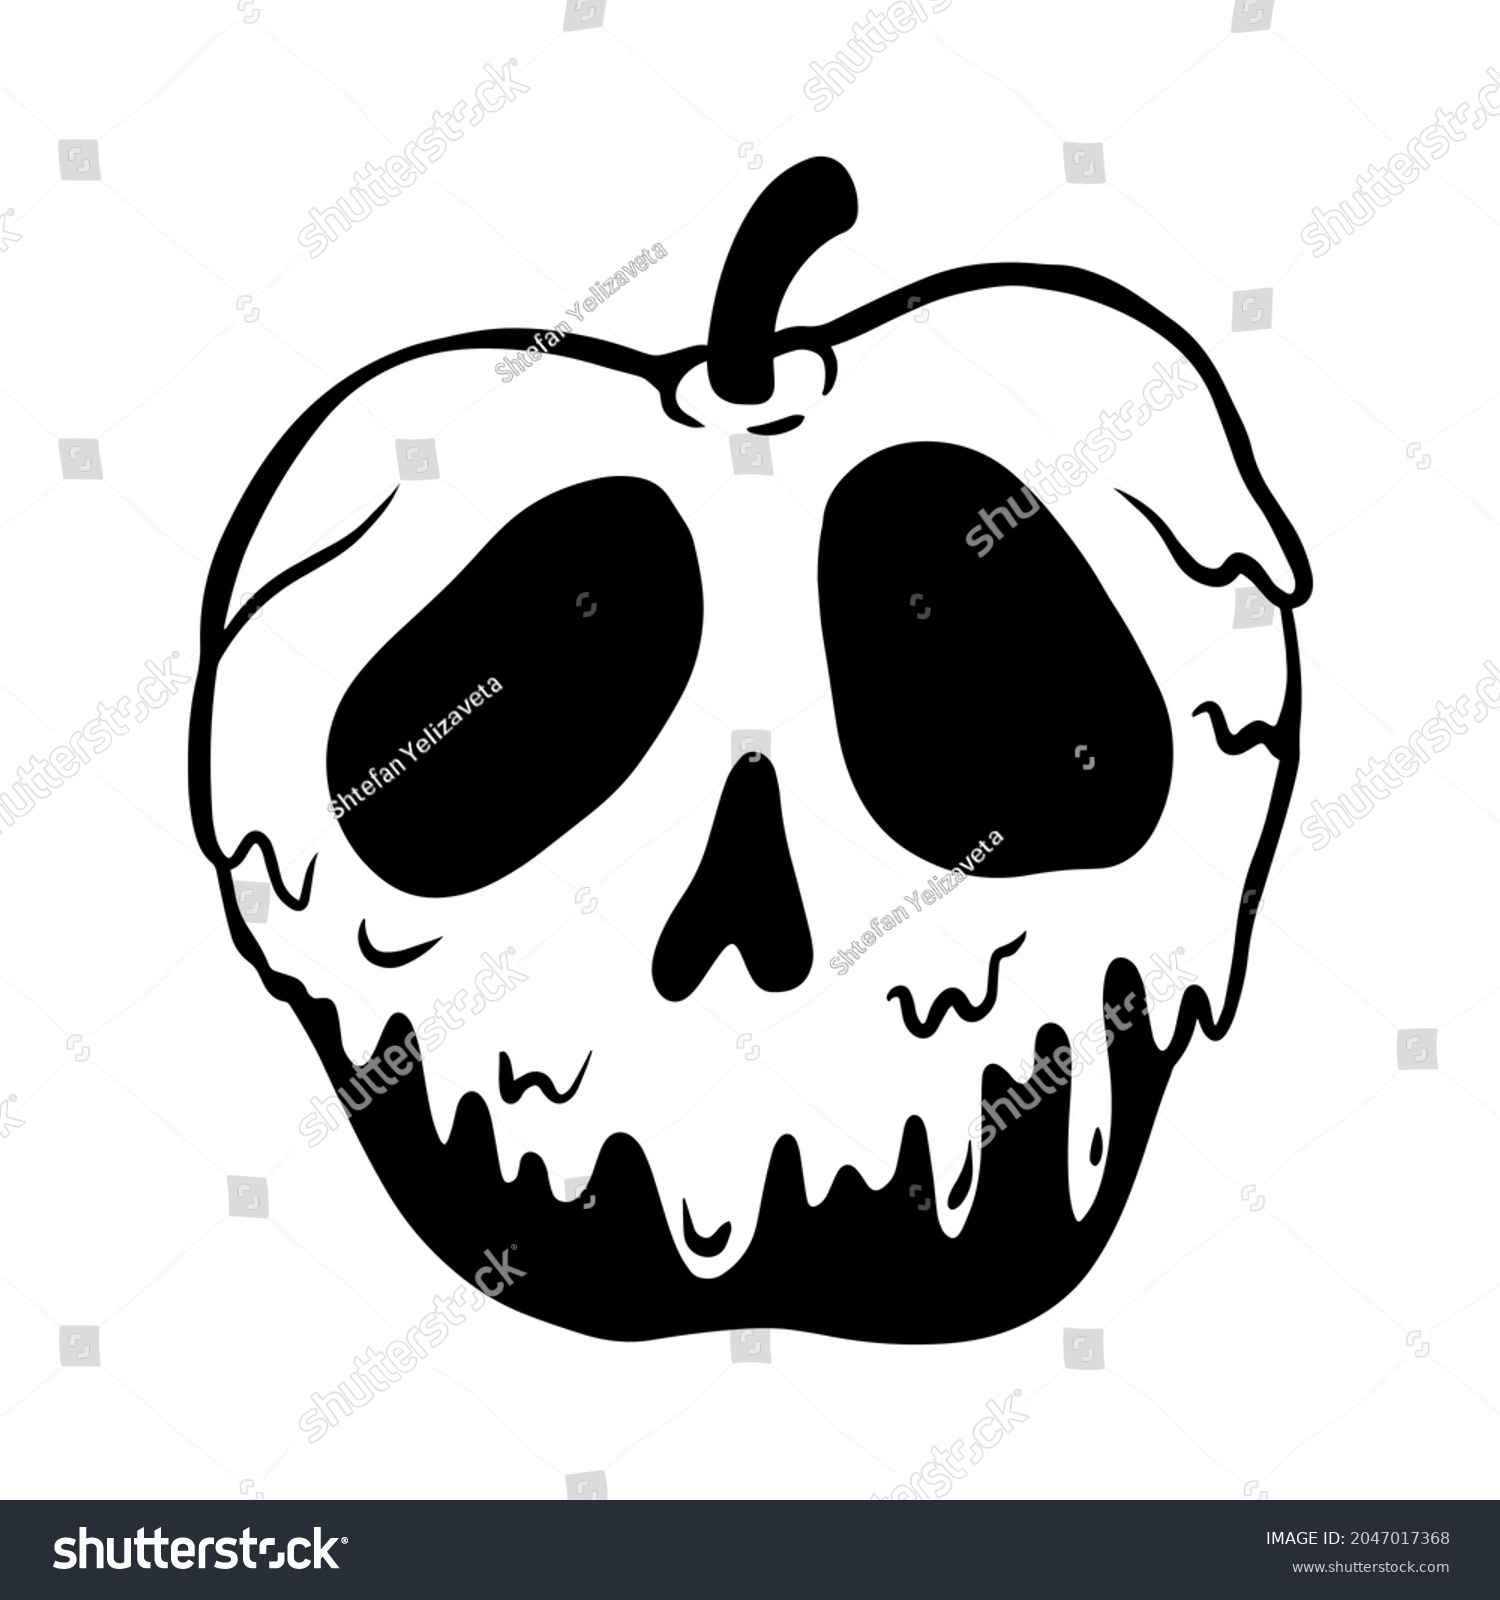 SVG of Apple skull cut file,Poison apple icon, black and white hand drawn line art, stock vector illustration isolated on white background svg